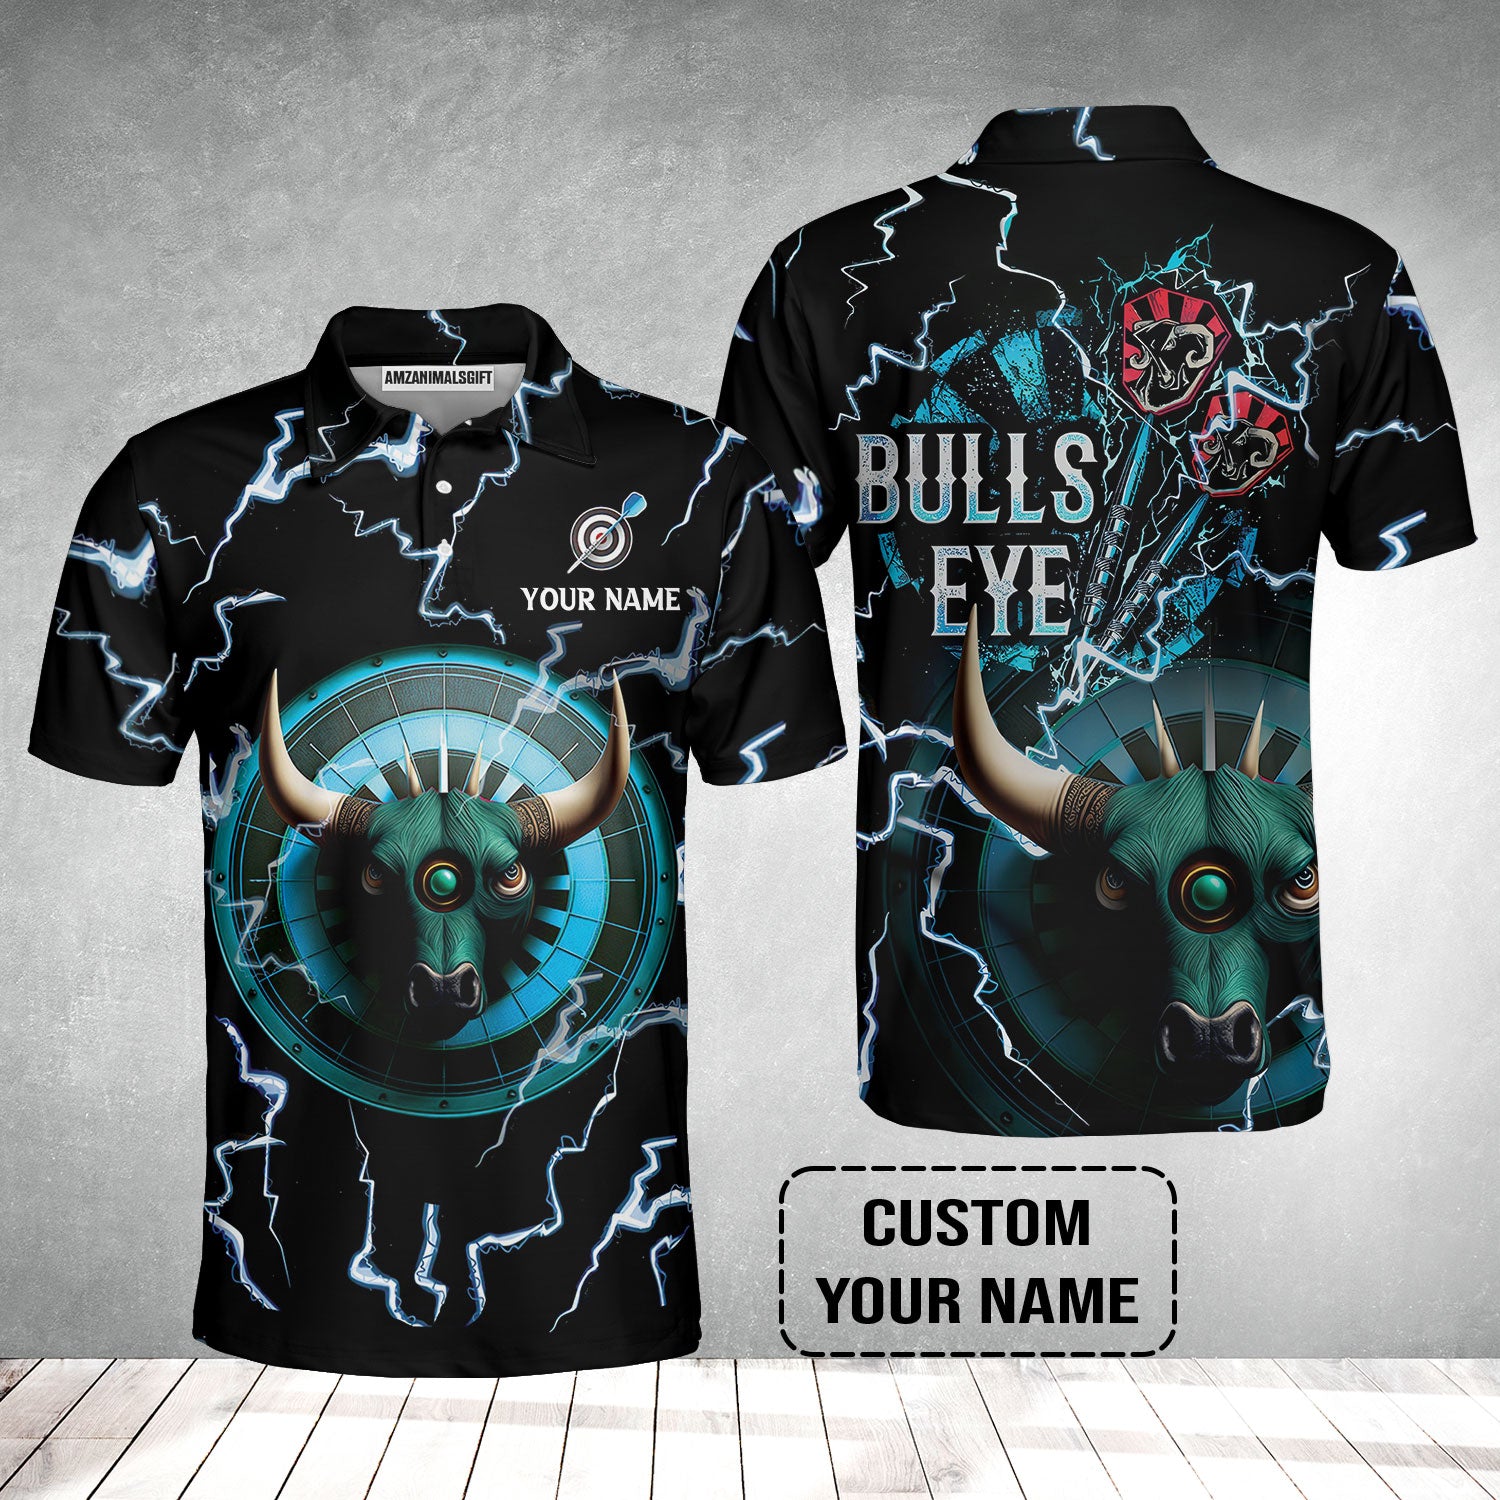 Customized Darts Polo Shirt, Bullseye Dartboard, Personalized Name Darts And Bull Polo Shirt For Men  - Perfect Gift For Darts Lovers, Darts Players